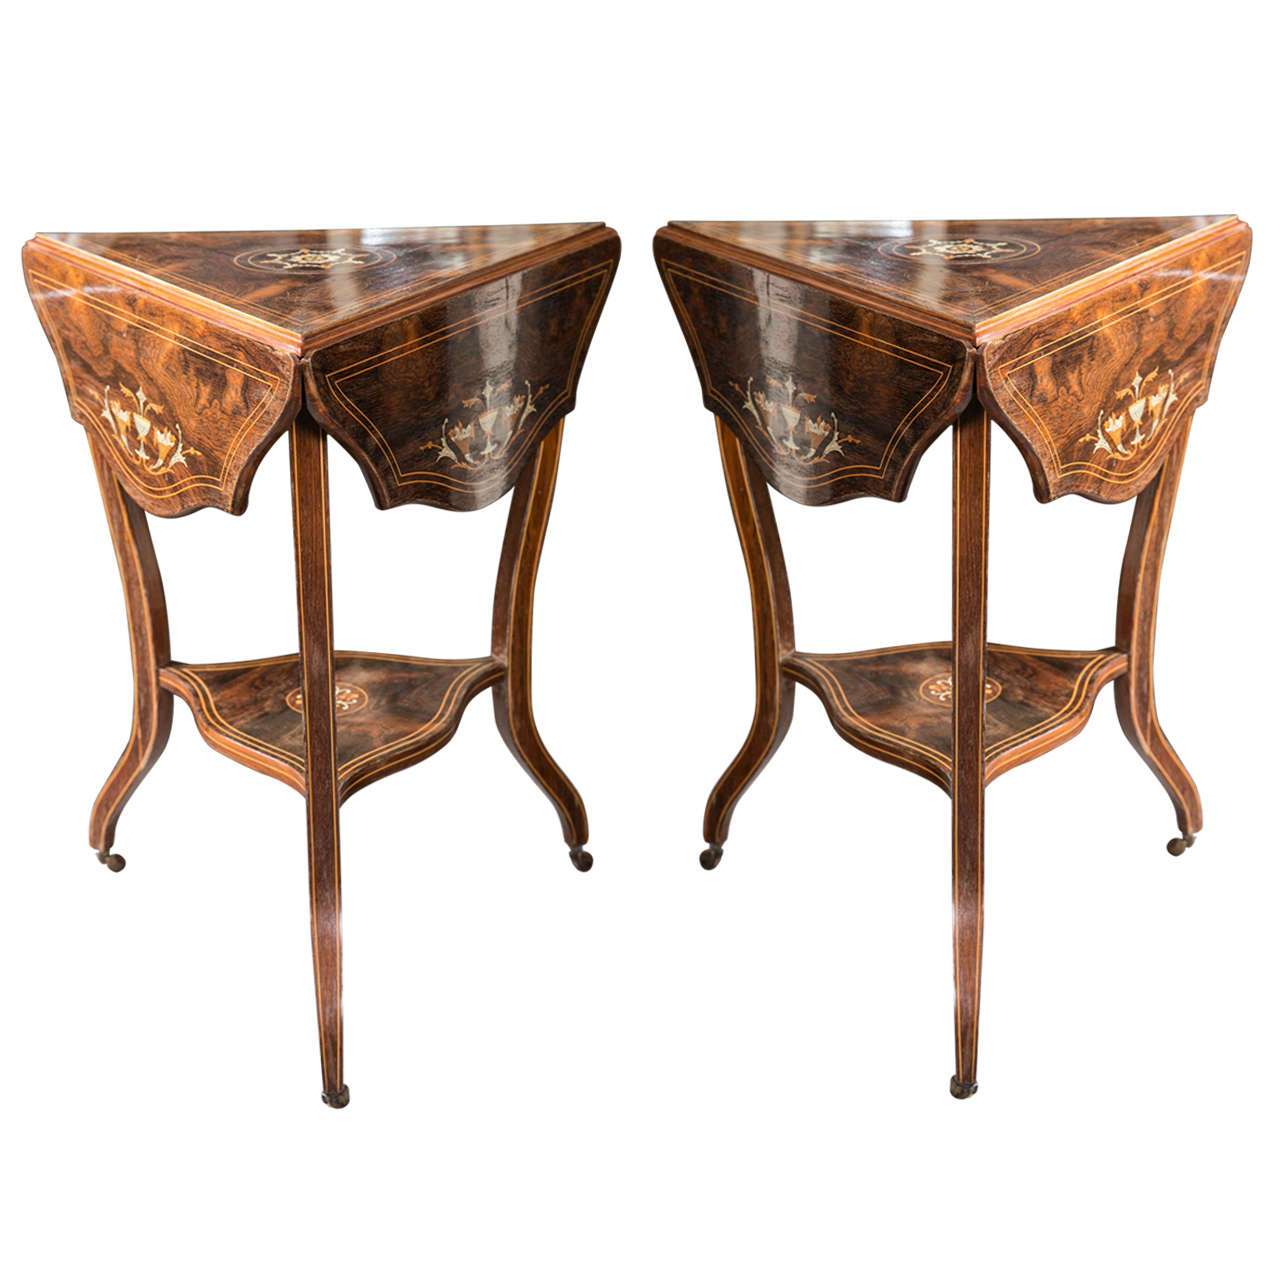 Unusual Pair of Three-Sided Inlaid Occassional Tables